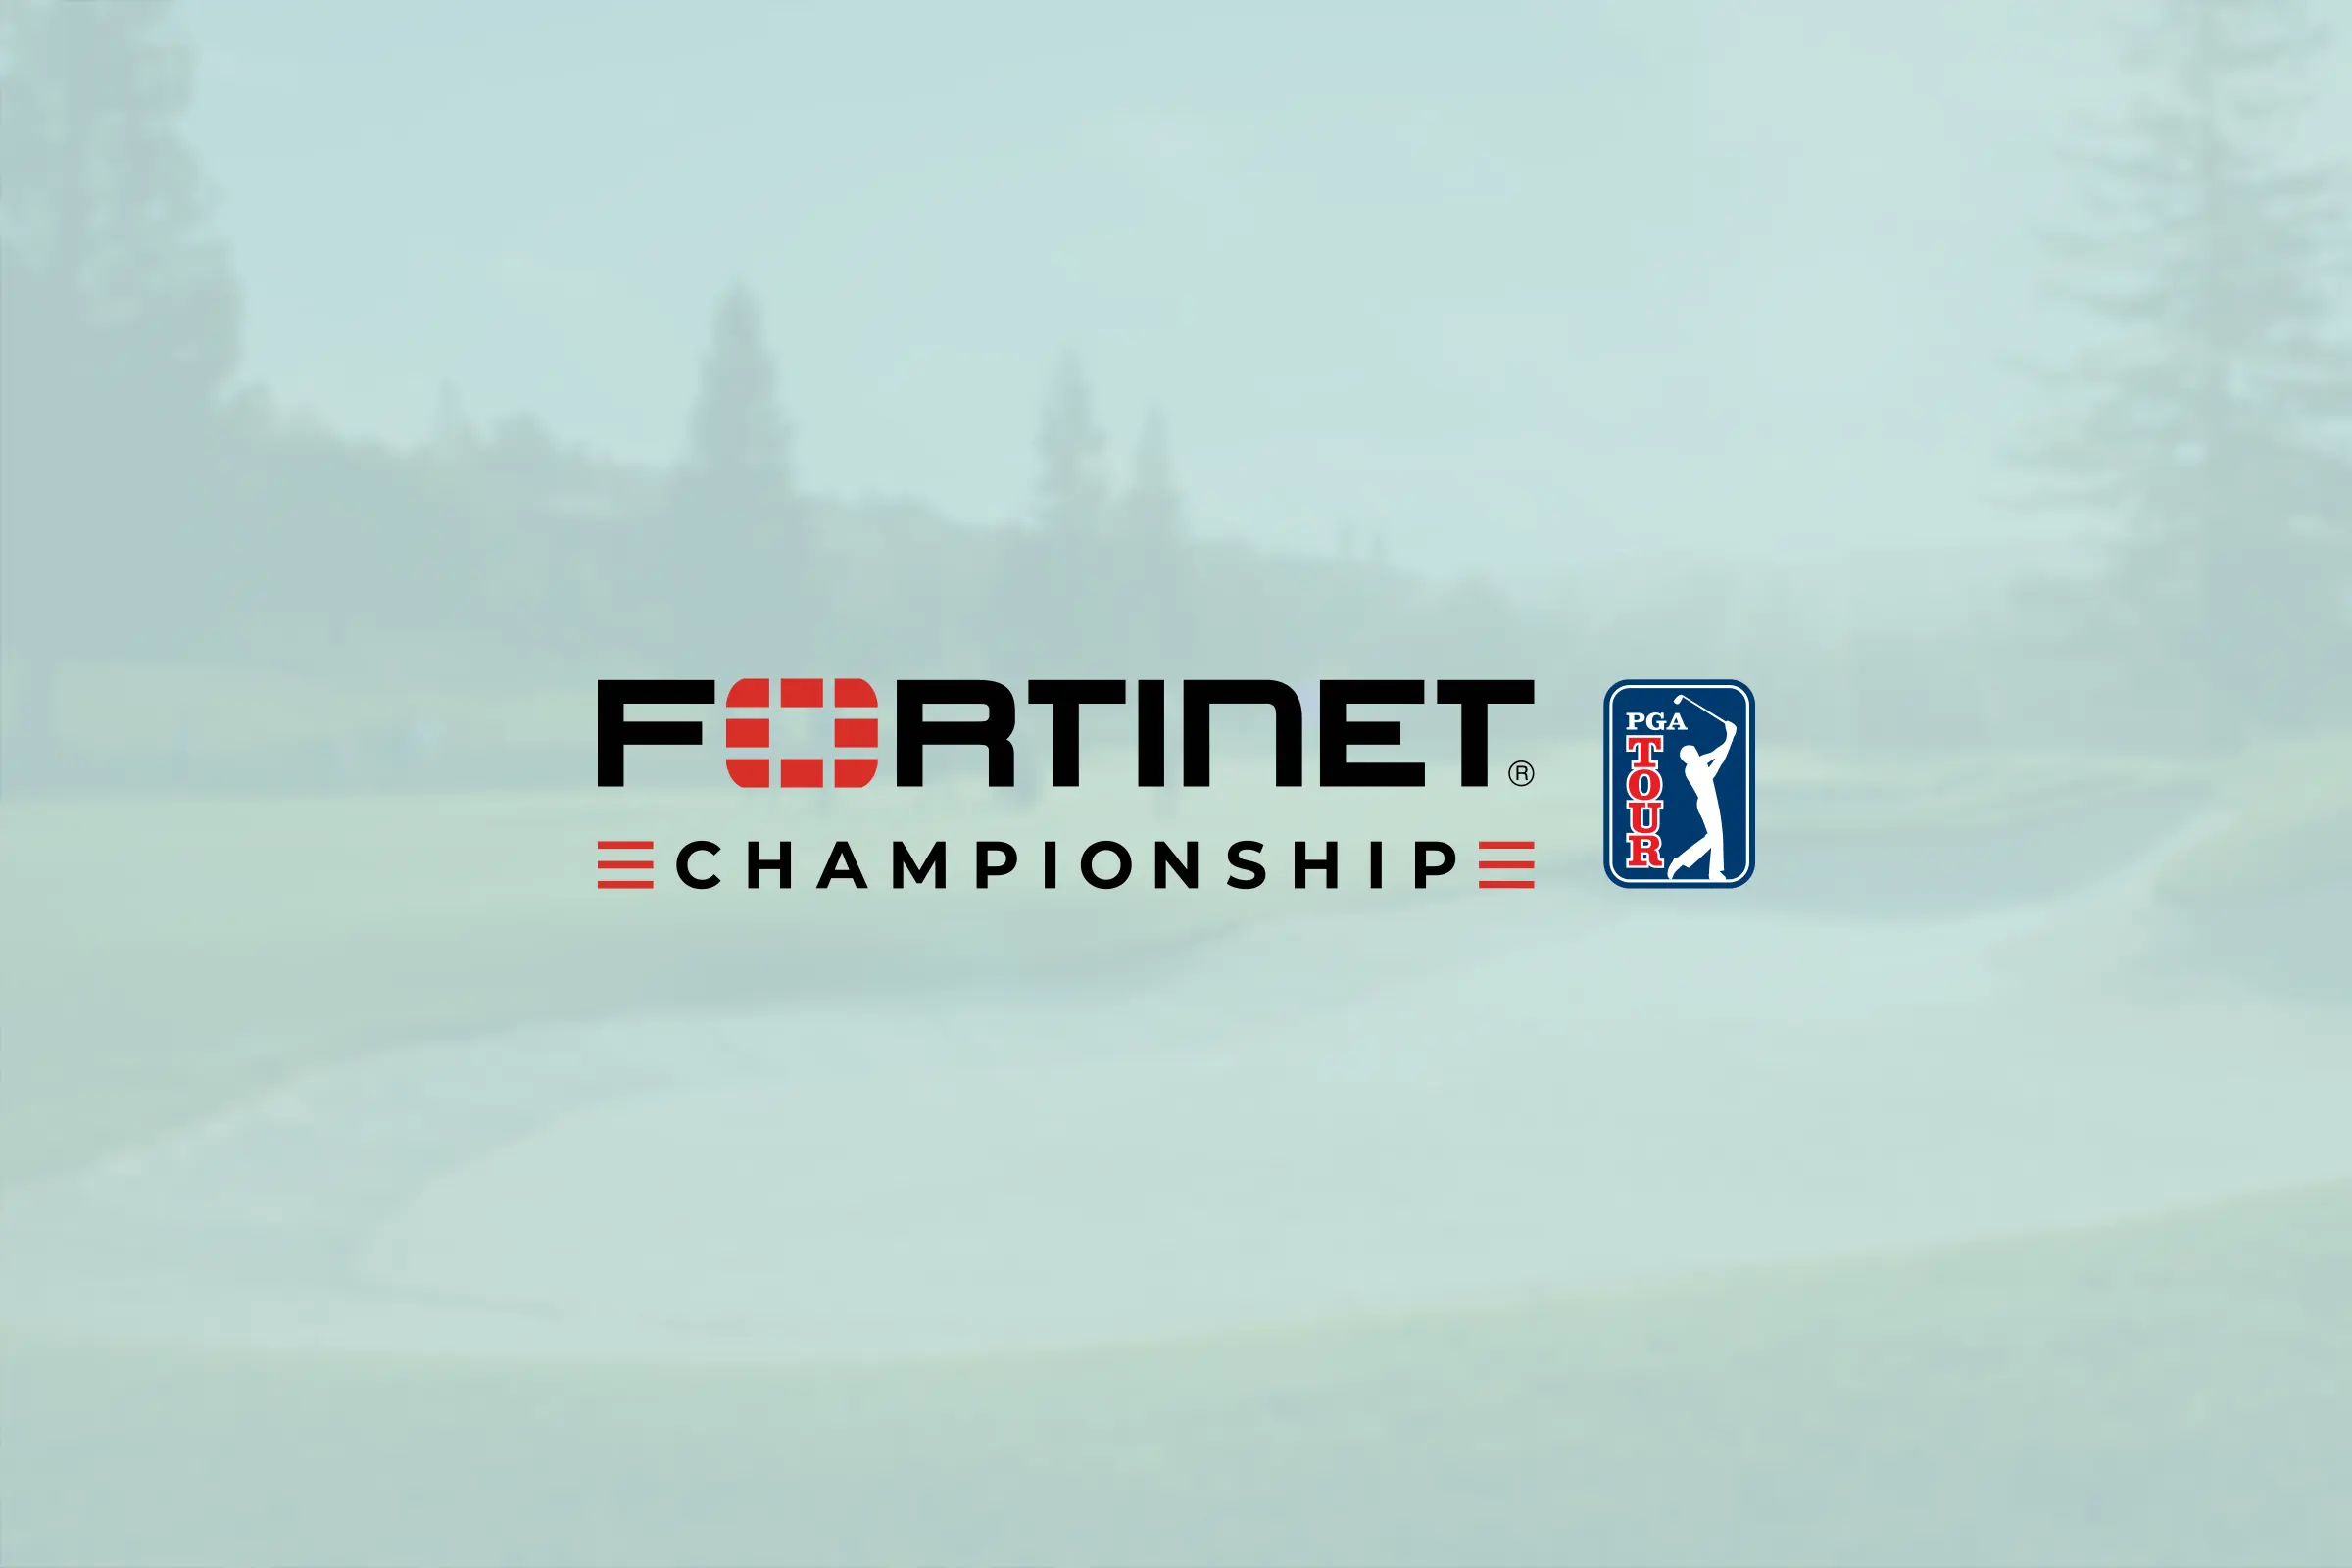 Fortinet Championship Announces New Course Enhancements Ahead of 2023 Event